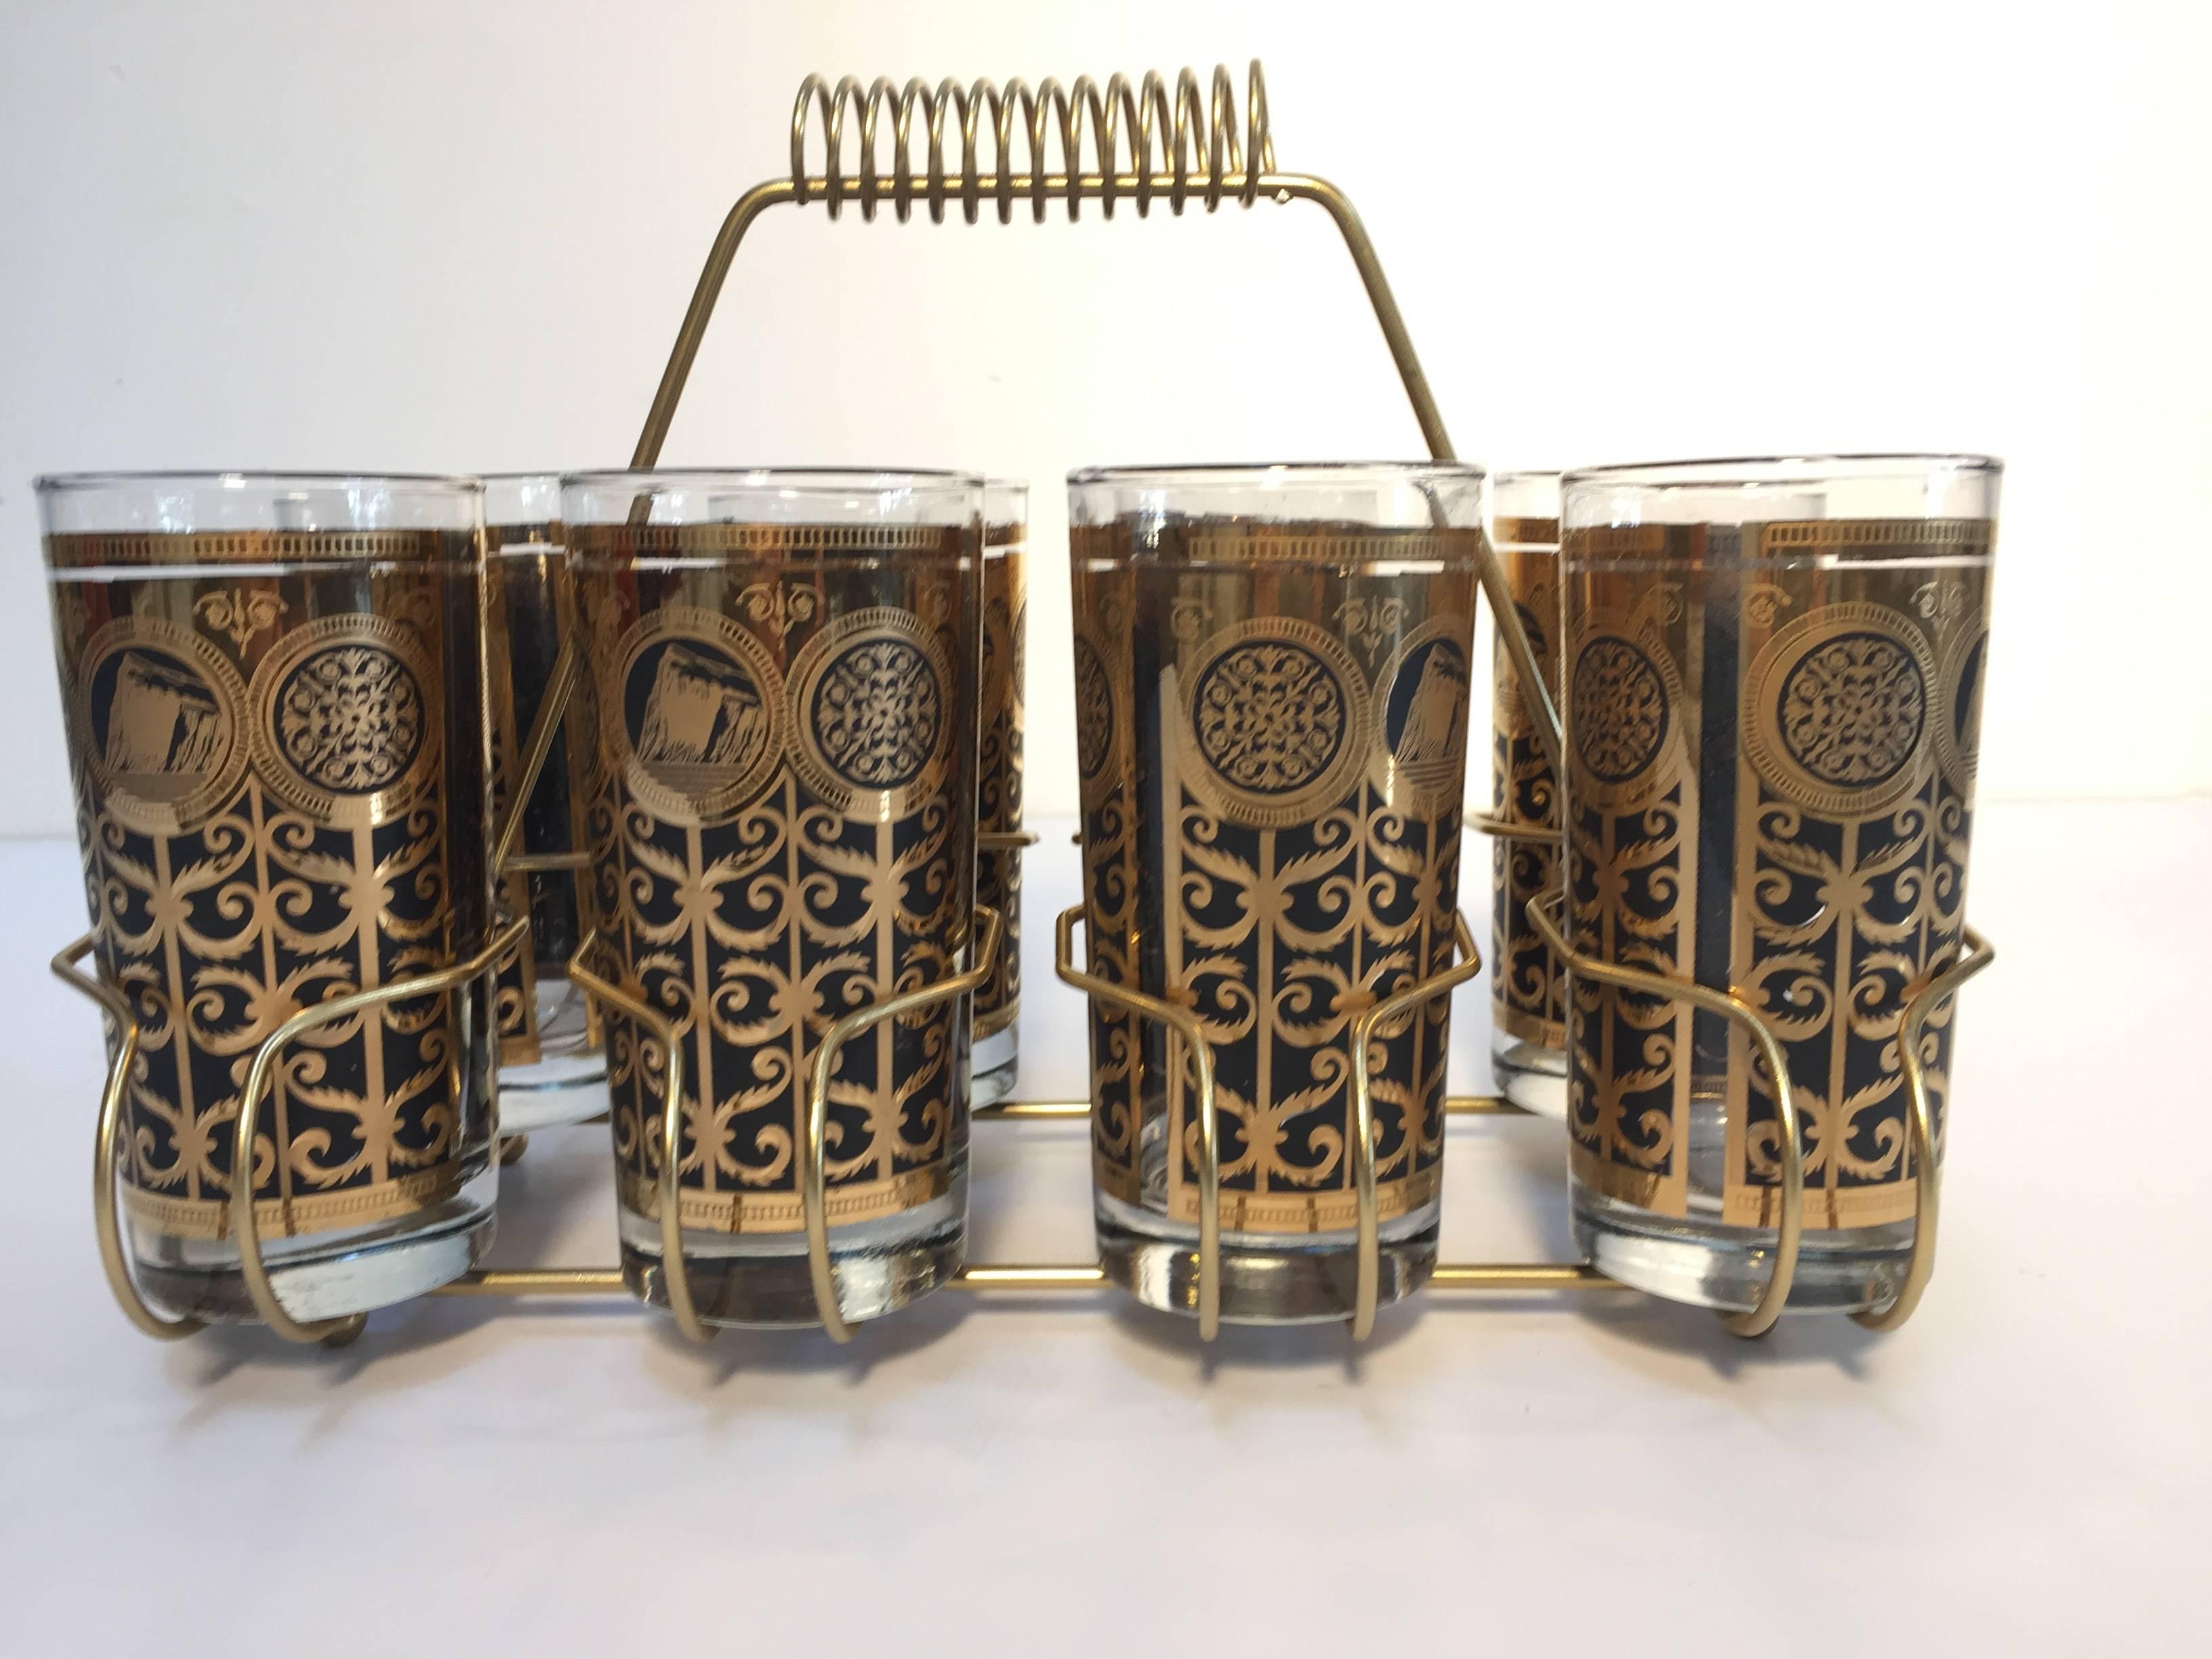 Elegant exquisite vintage set of eight Collins glasses designed by Fred Press.
Set includes eight highball glasses in a polished brass cart with handle.
The glasses are decorated with gold and black.
Perfect vintage condition, with 22-karat gold